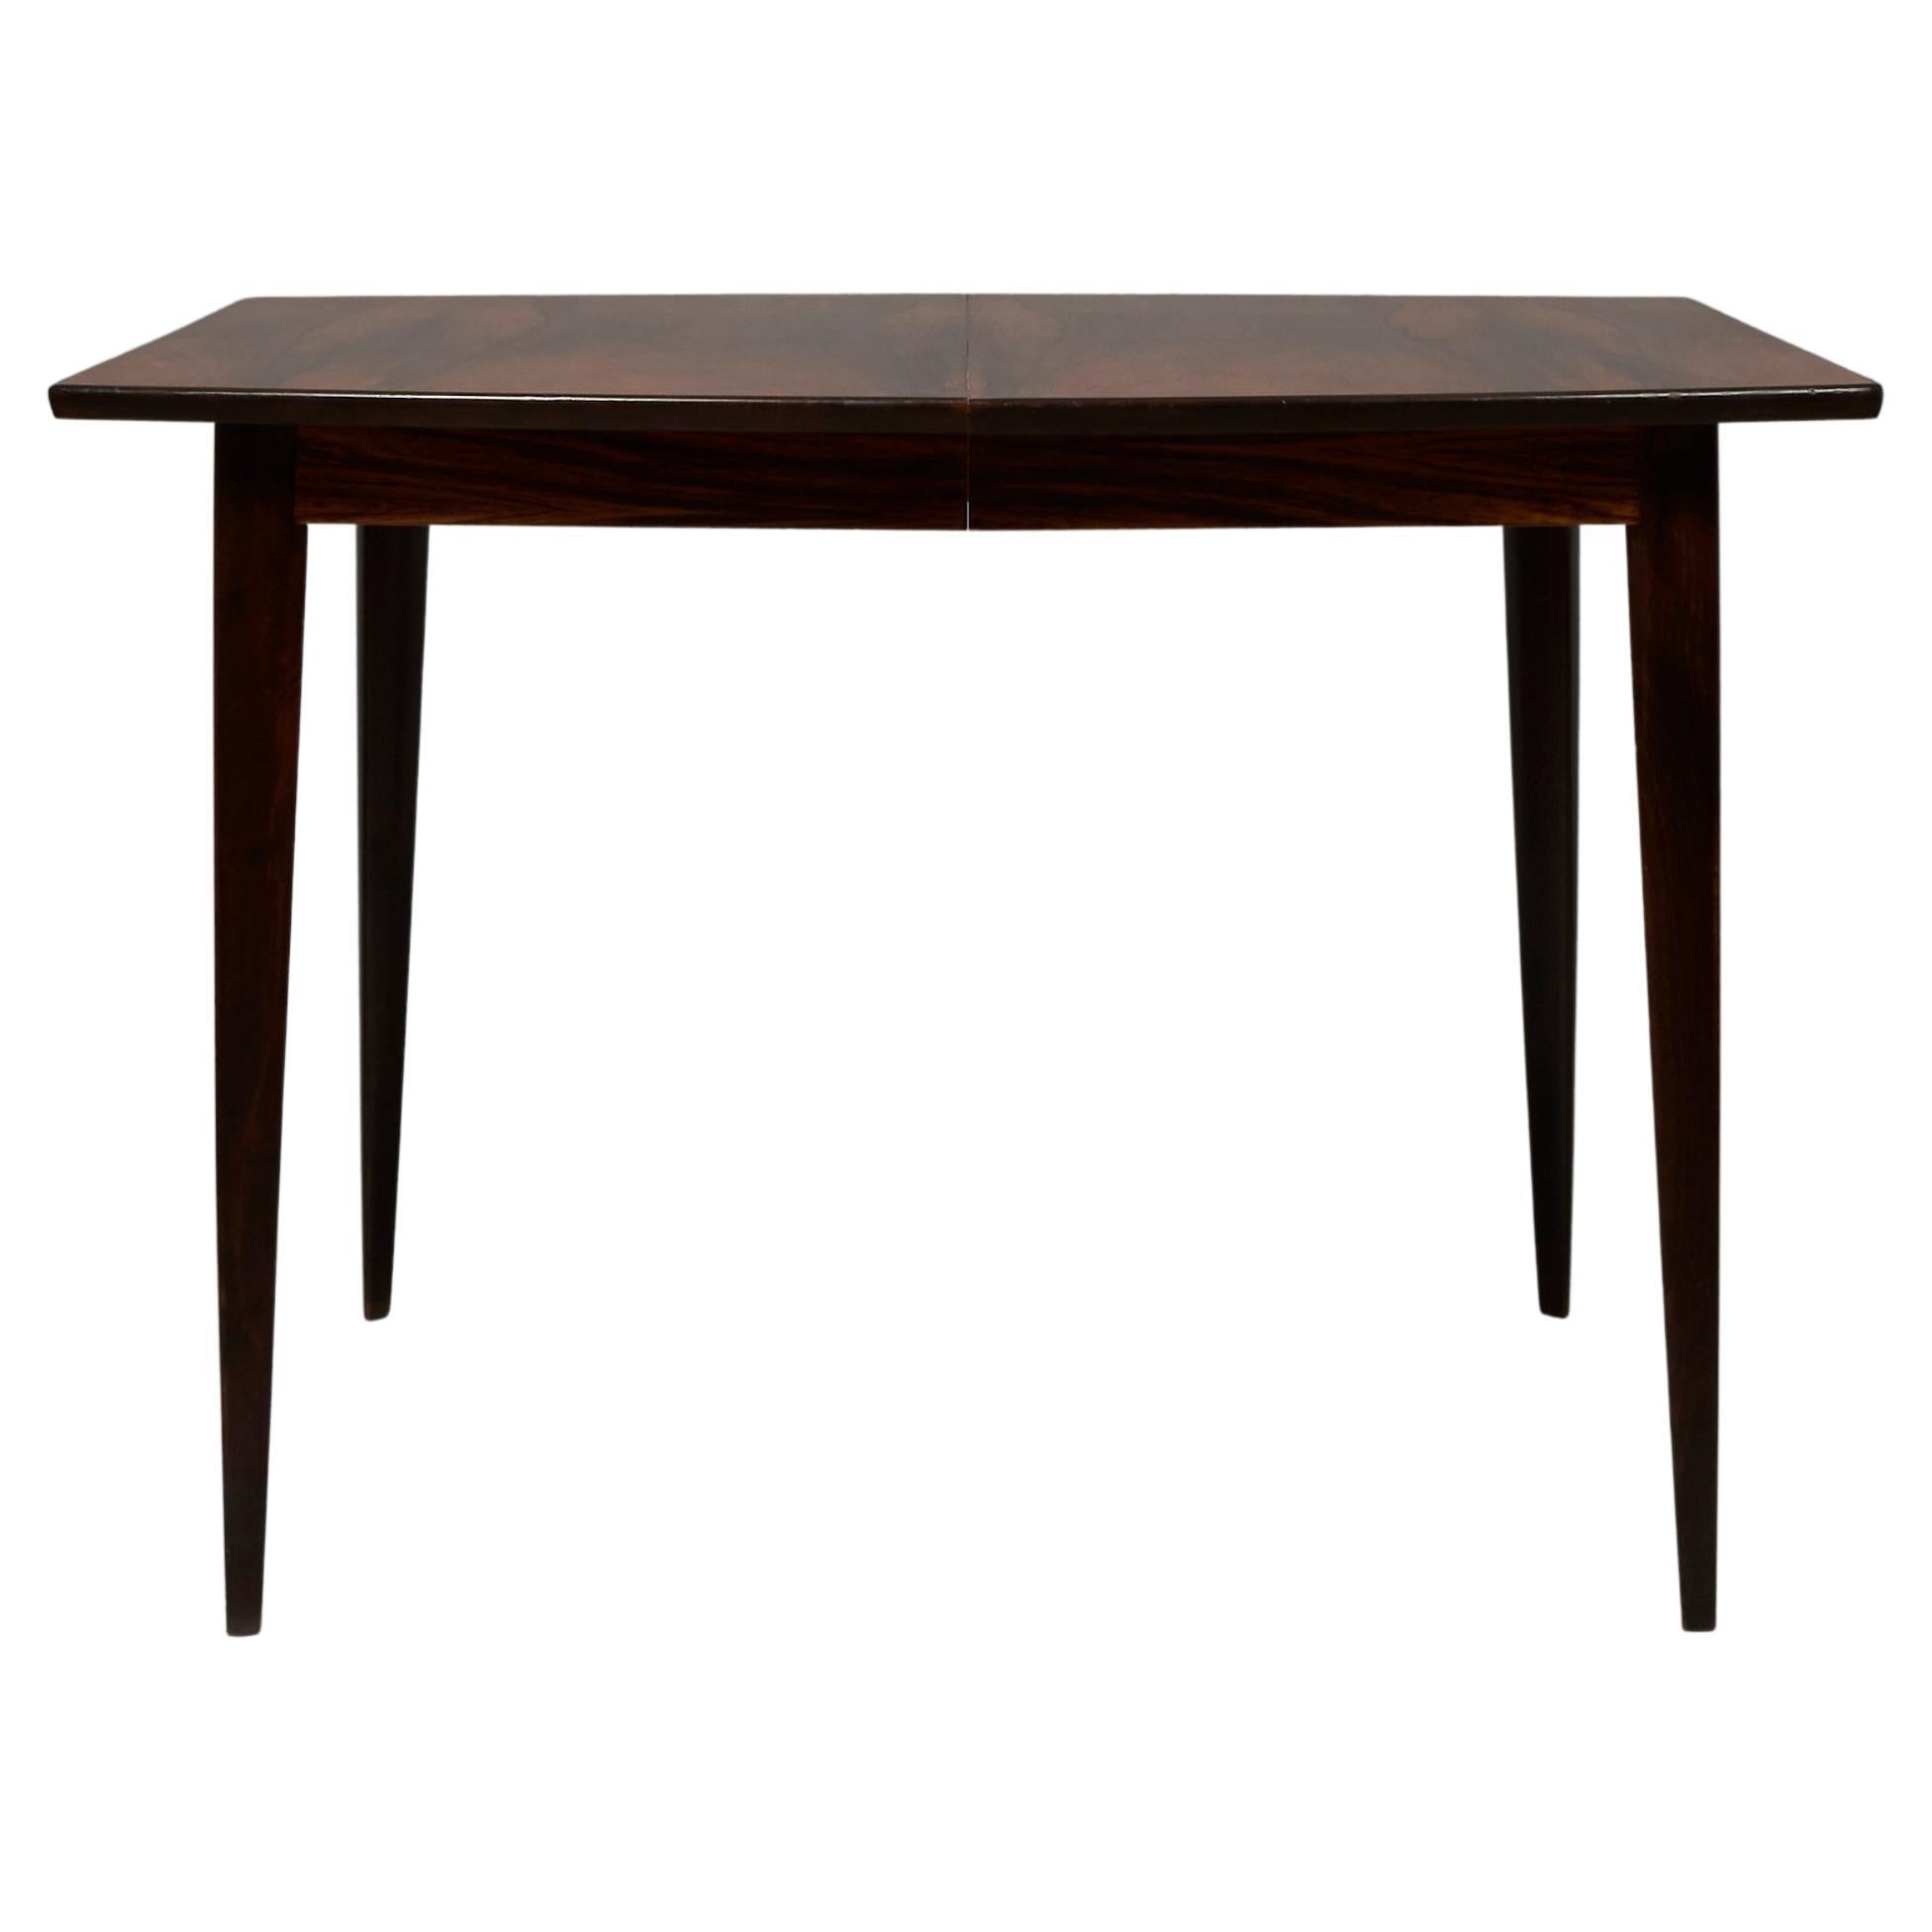 1960s, Rosewood Extensible Dining Table